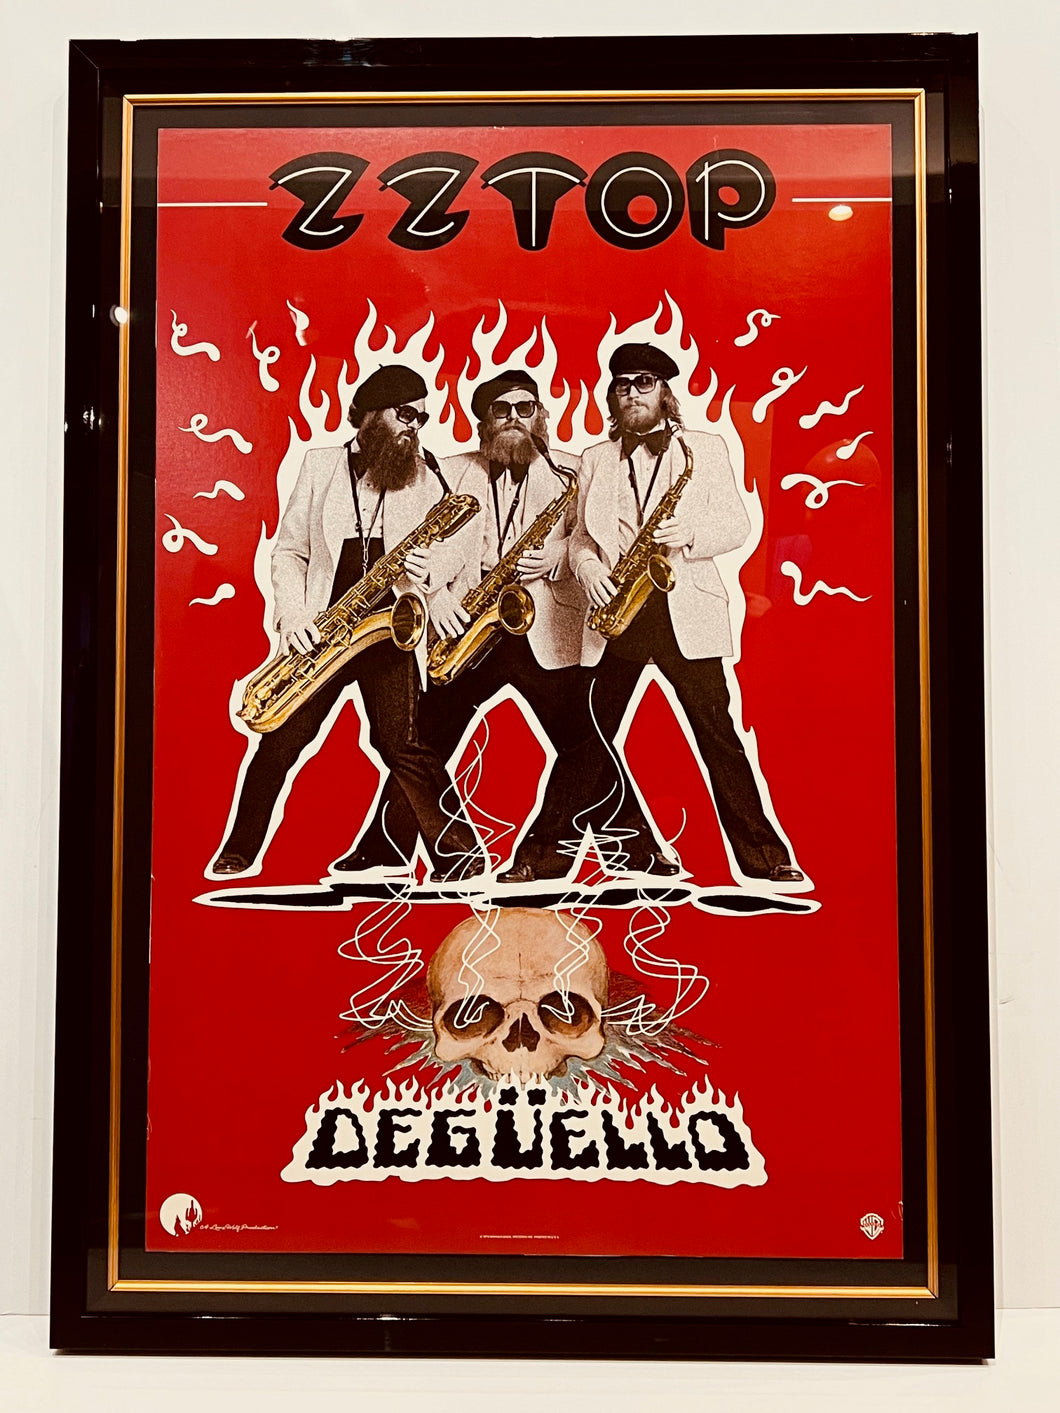 GREAT ZZ TOP DEGUELLO PROMOTIONAL POSTER!